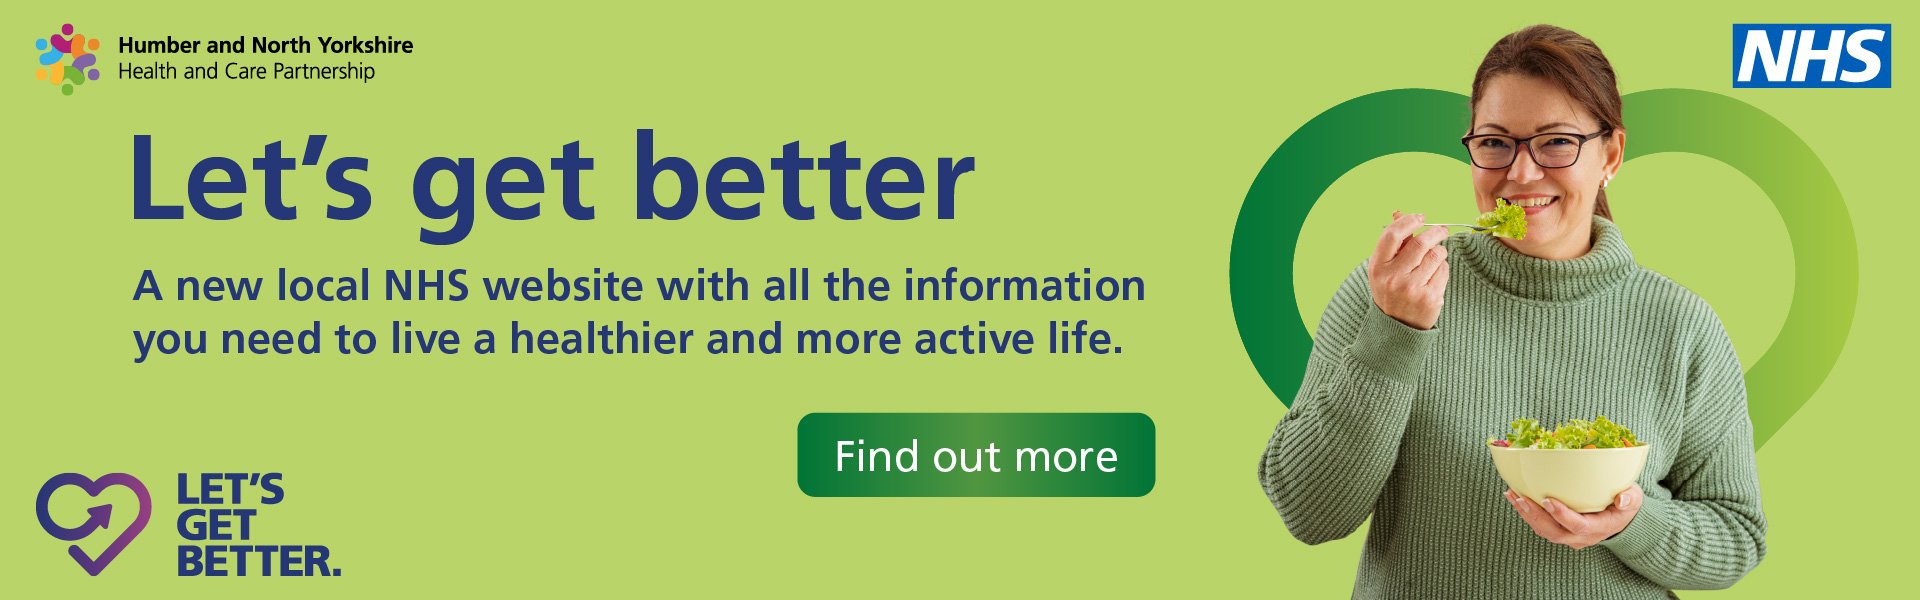 Let's Get Better: A new local NHS website with all the information you need to live a healthier and more active life